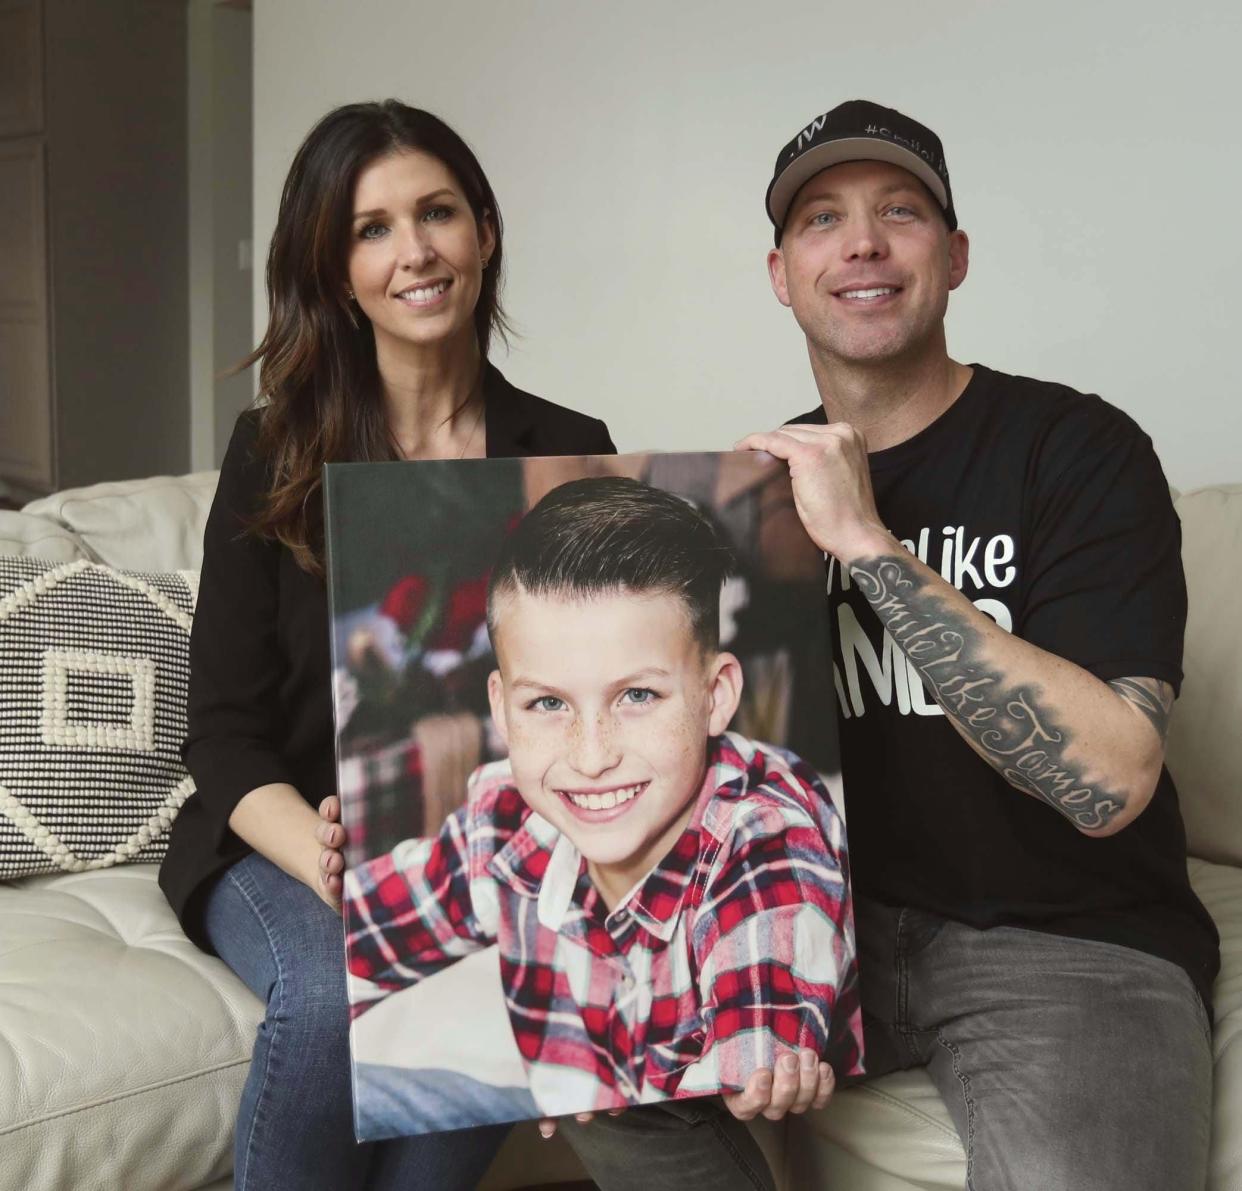 Joanna Ward and Ryan Ward hold a photograph of their son James, 10, in Jackson Township. James went to sleep March 11, 2019 and did not wake up the next morning. His unexplained death is called Unexplained Death in Childhood similar to Sudden Infant Death Syndrome (SIDS) in infants. Ryan wrote a song for his son who left a positive impression on many people's lives. There is also a Facebook page called "Smile Like James."